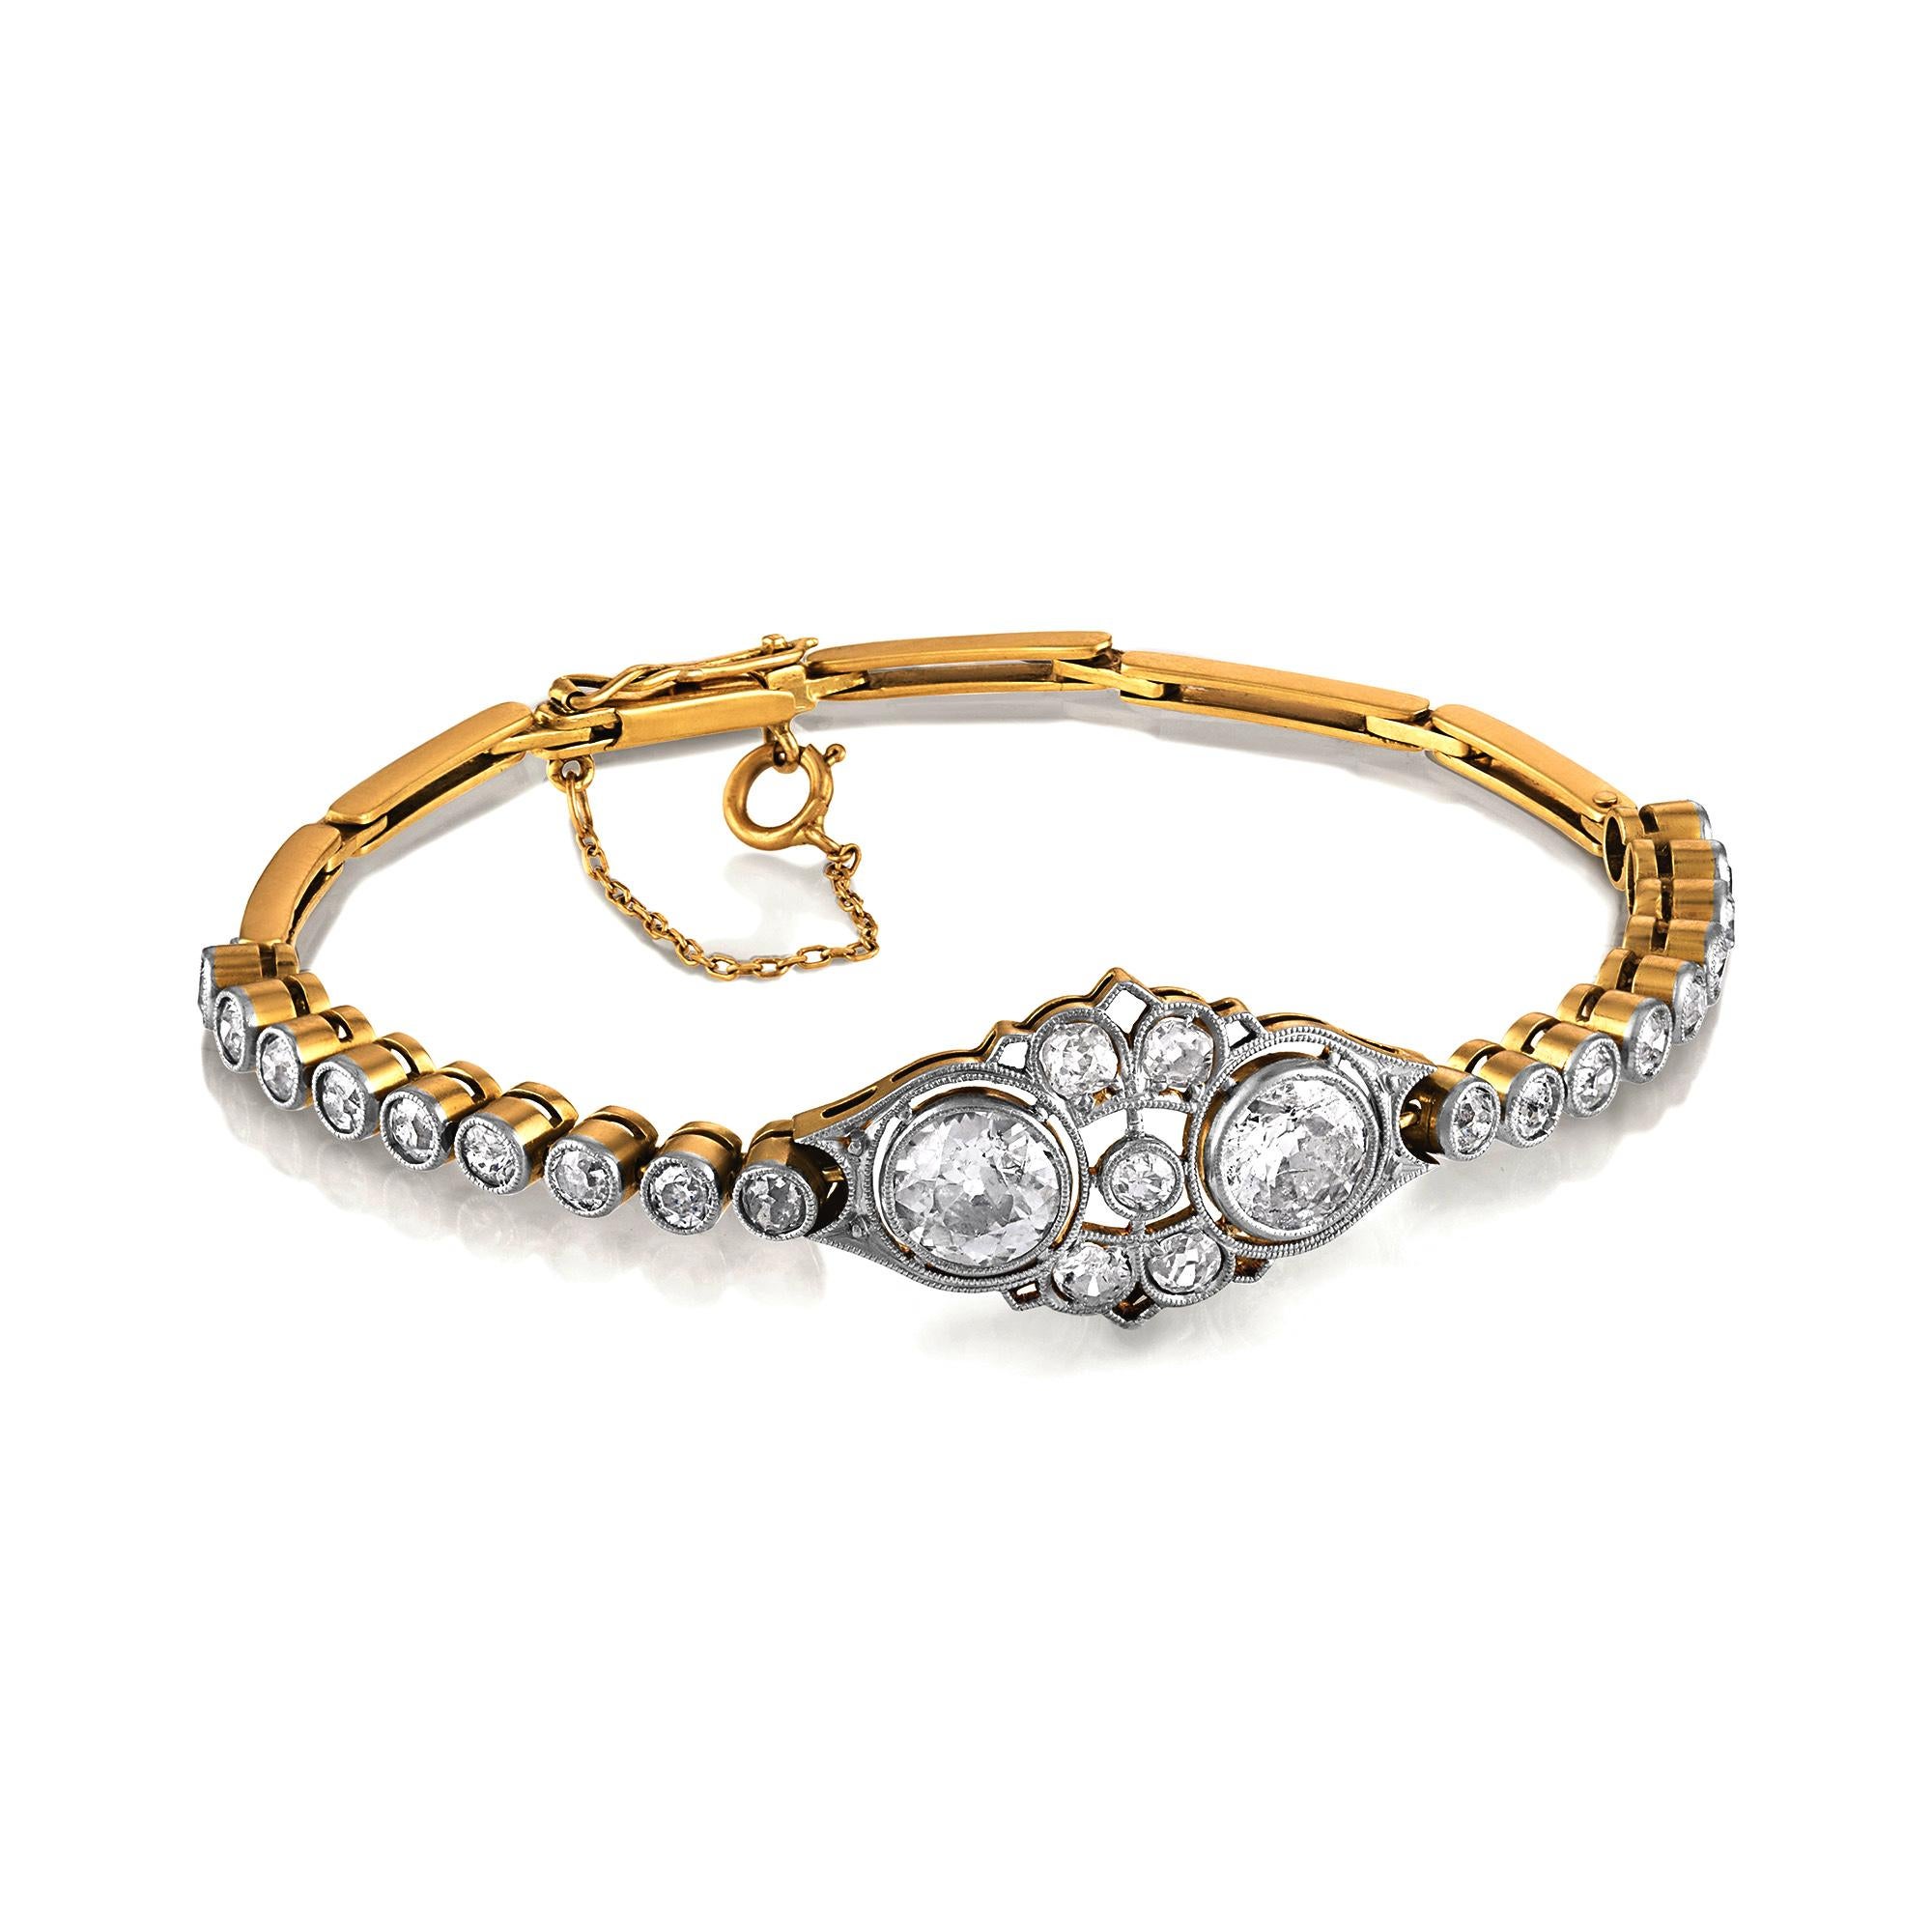 Edwardian Twin 2.68ct Old Euro Diamond Bezel Set Tennis Line Gold & Platinum Antique BRACELET

Dating back to the turn-of-the-20th-century (circa 1900), the gorgeous and most feminine bracelet that rarely comes in the market. A truly step up from